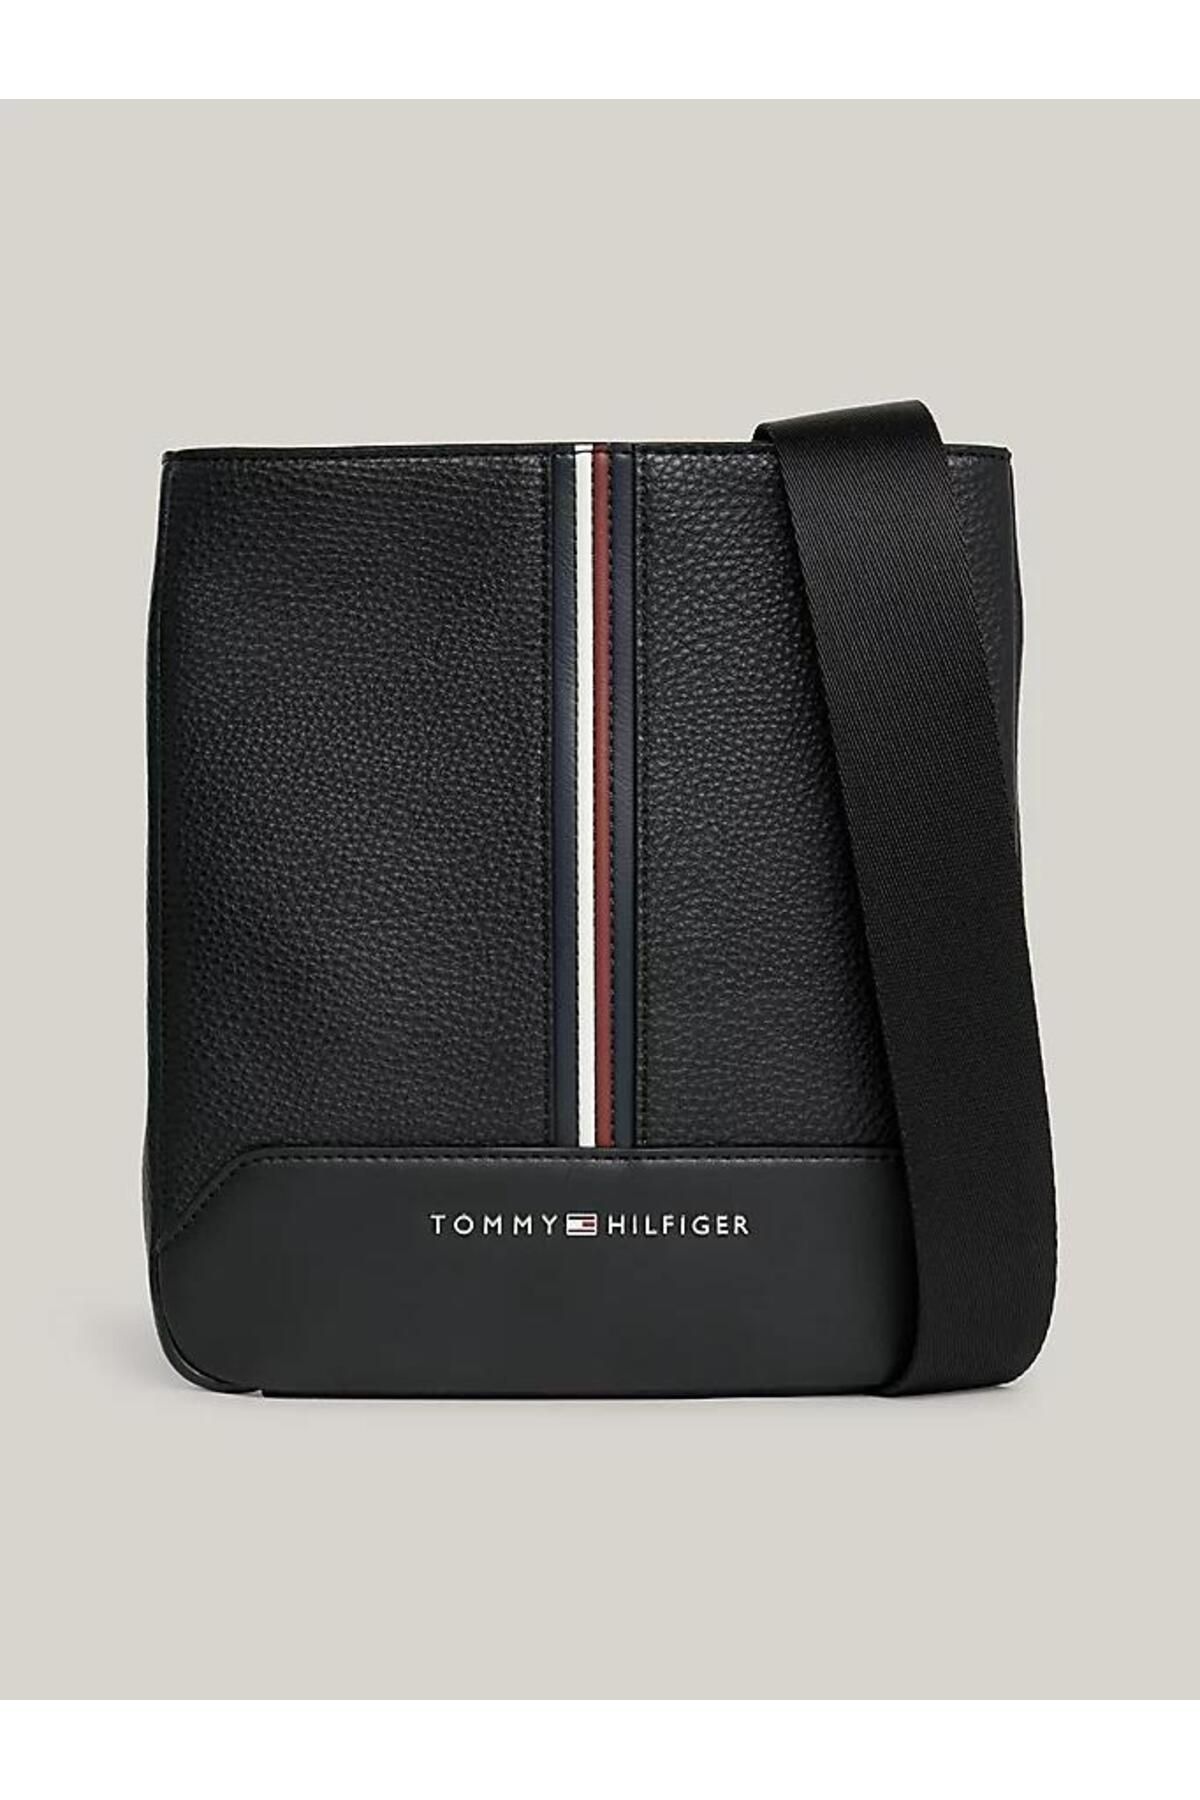 Tommy Hilfiger TH CENTRAL MINI CROSSOVER